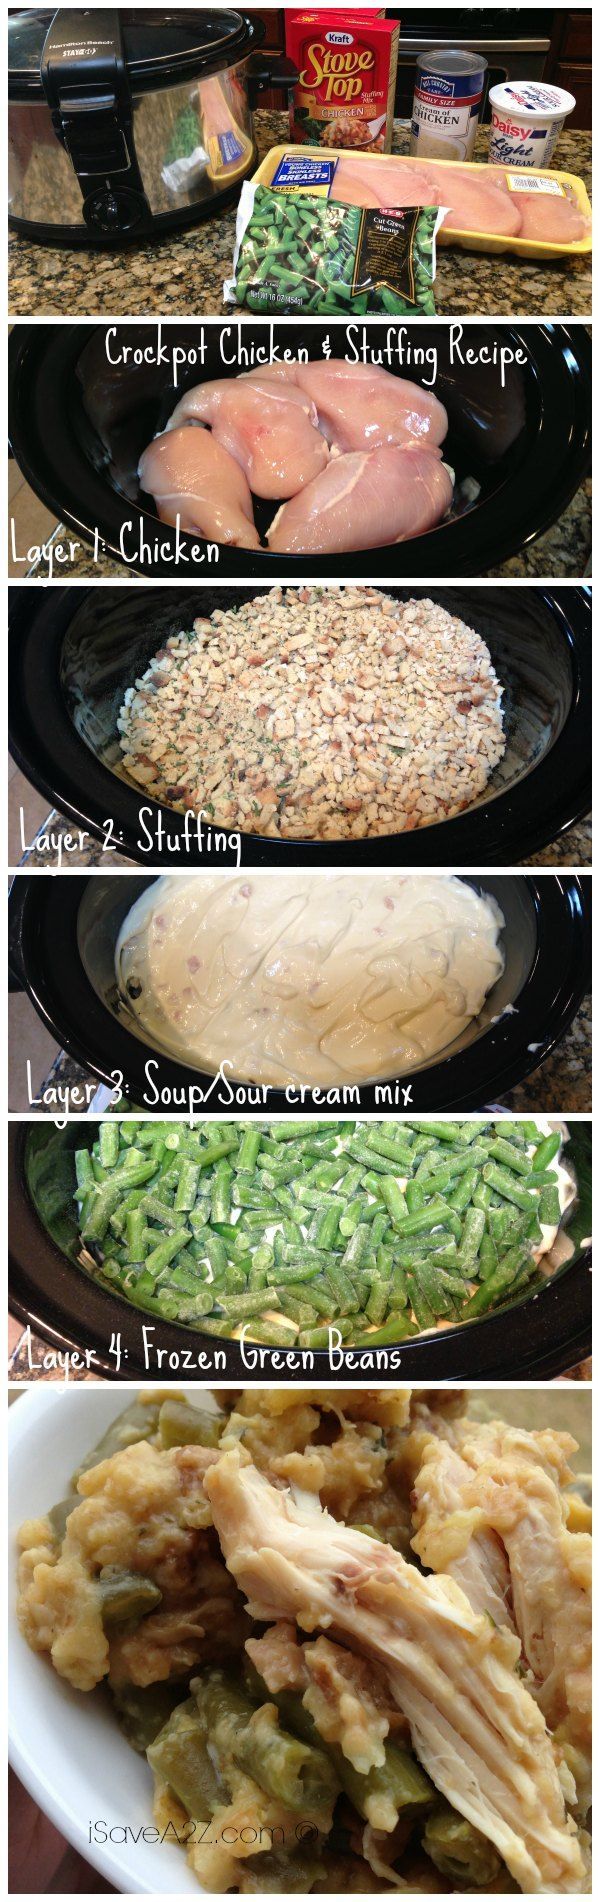 Crockpot Chicken and Stuffing Recipe SO GOOD!!